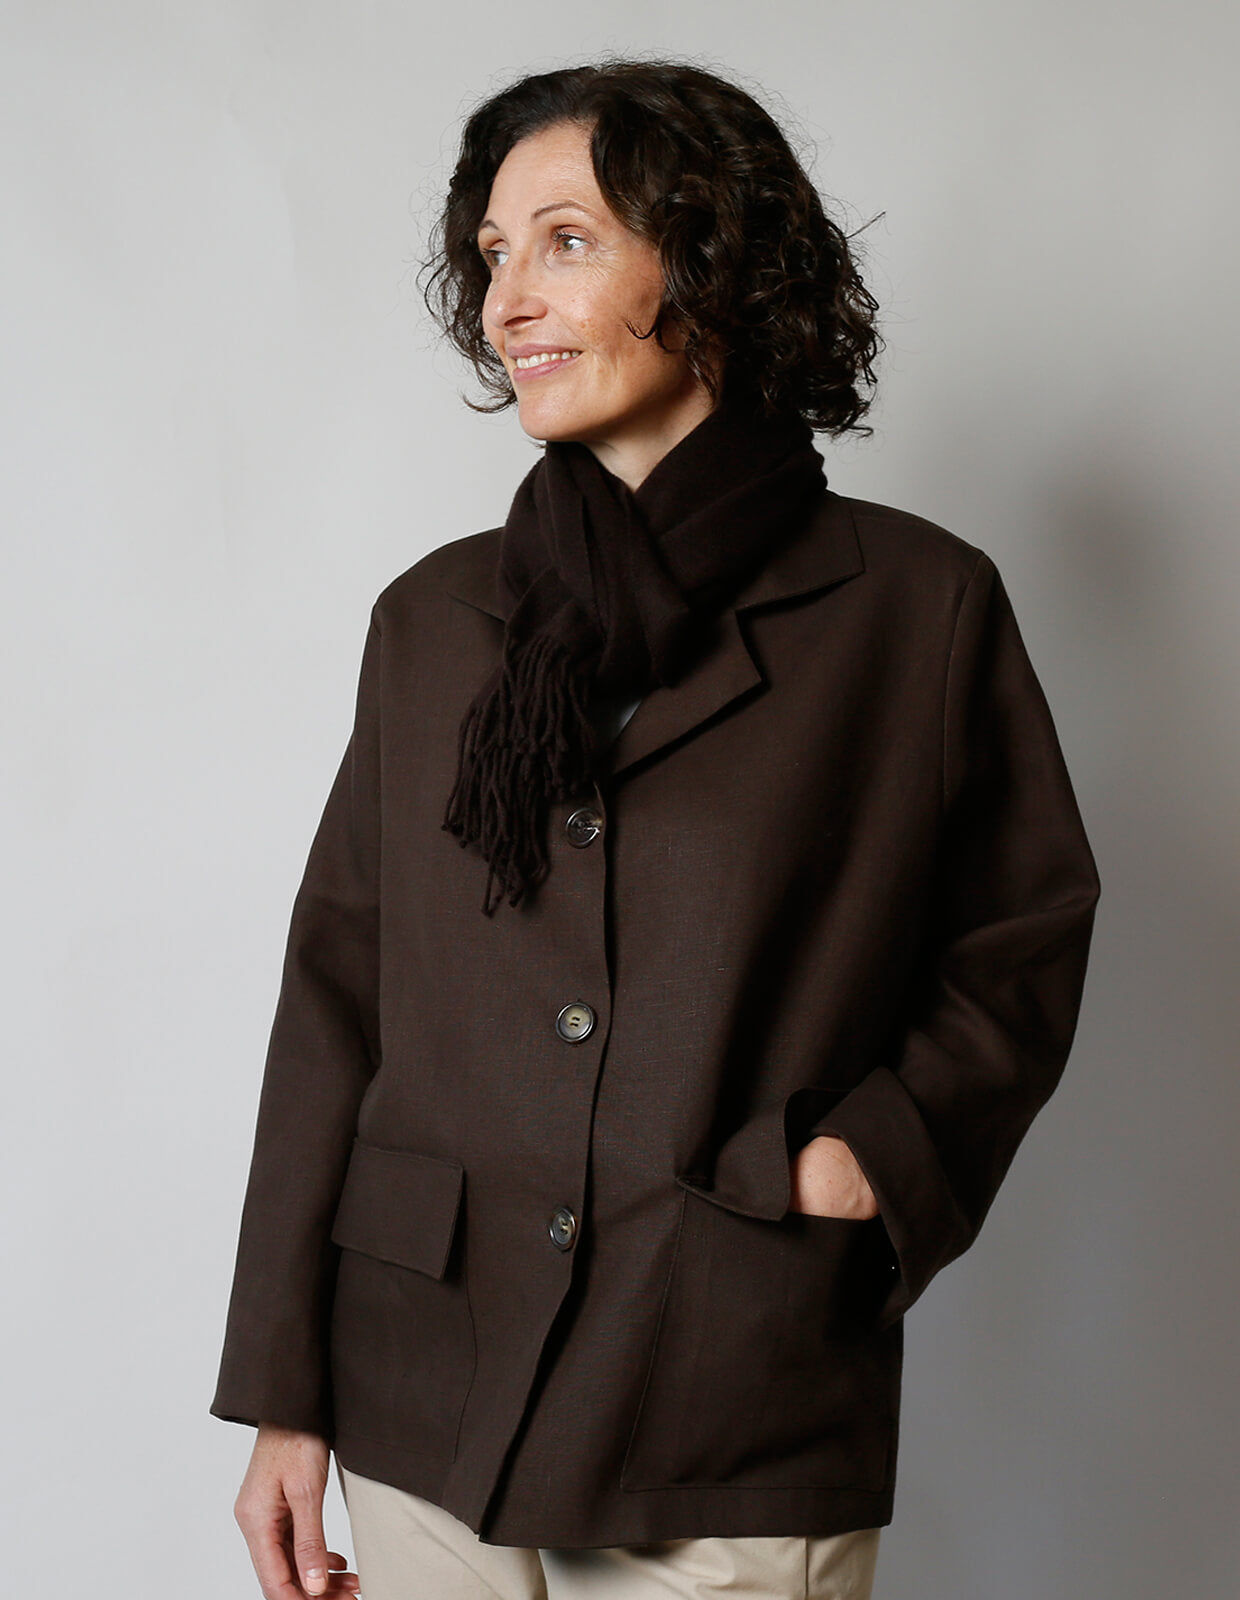 Woman wearing the Boxy Jacket sewing pattern from The Maker's Atelier on The Fold Line. A jacket pattern made in cottons, linens, denim, needlecord, lightweight leather or suede fabrics, featuring front patch pockets, back vent, lined or unlined, back yok